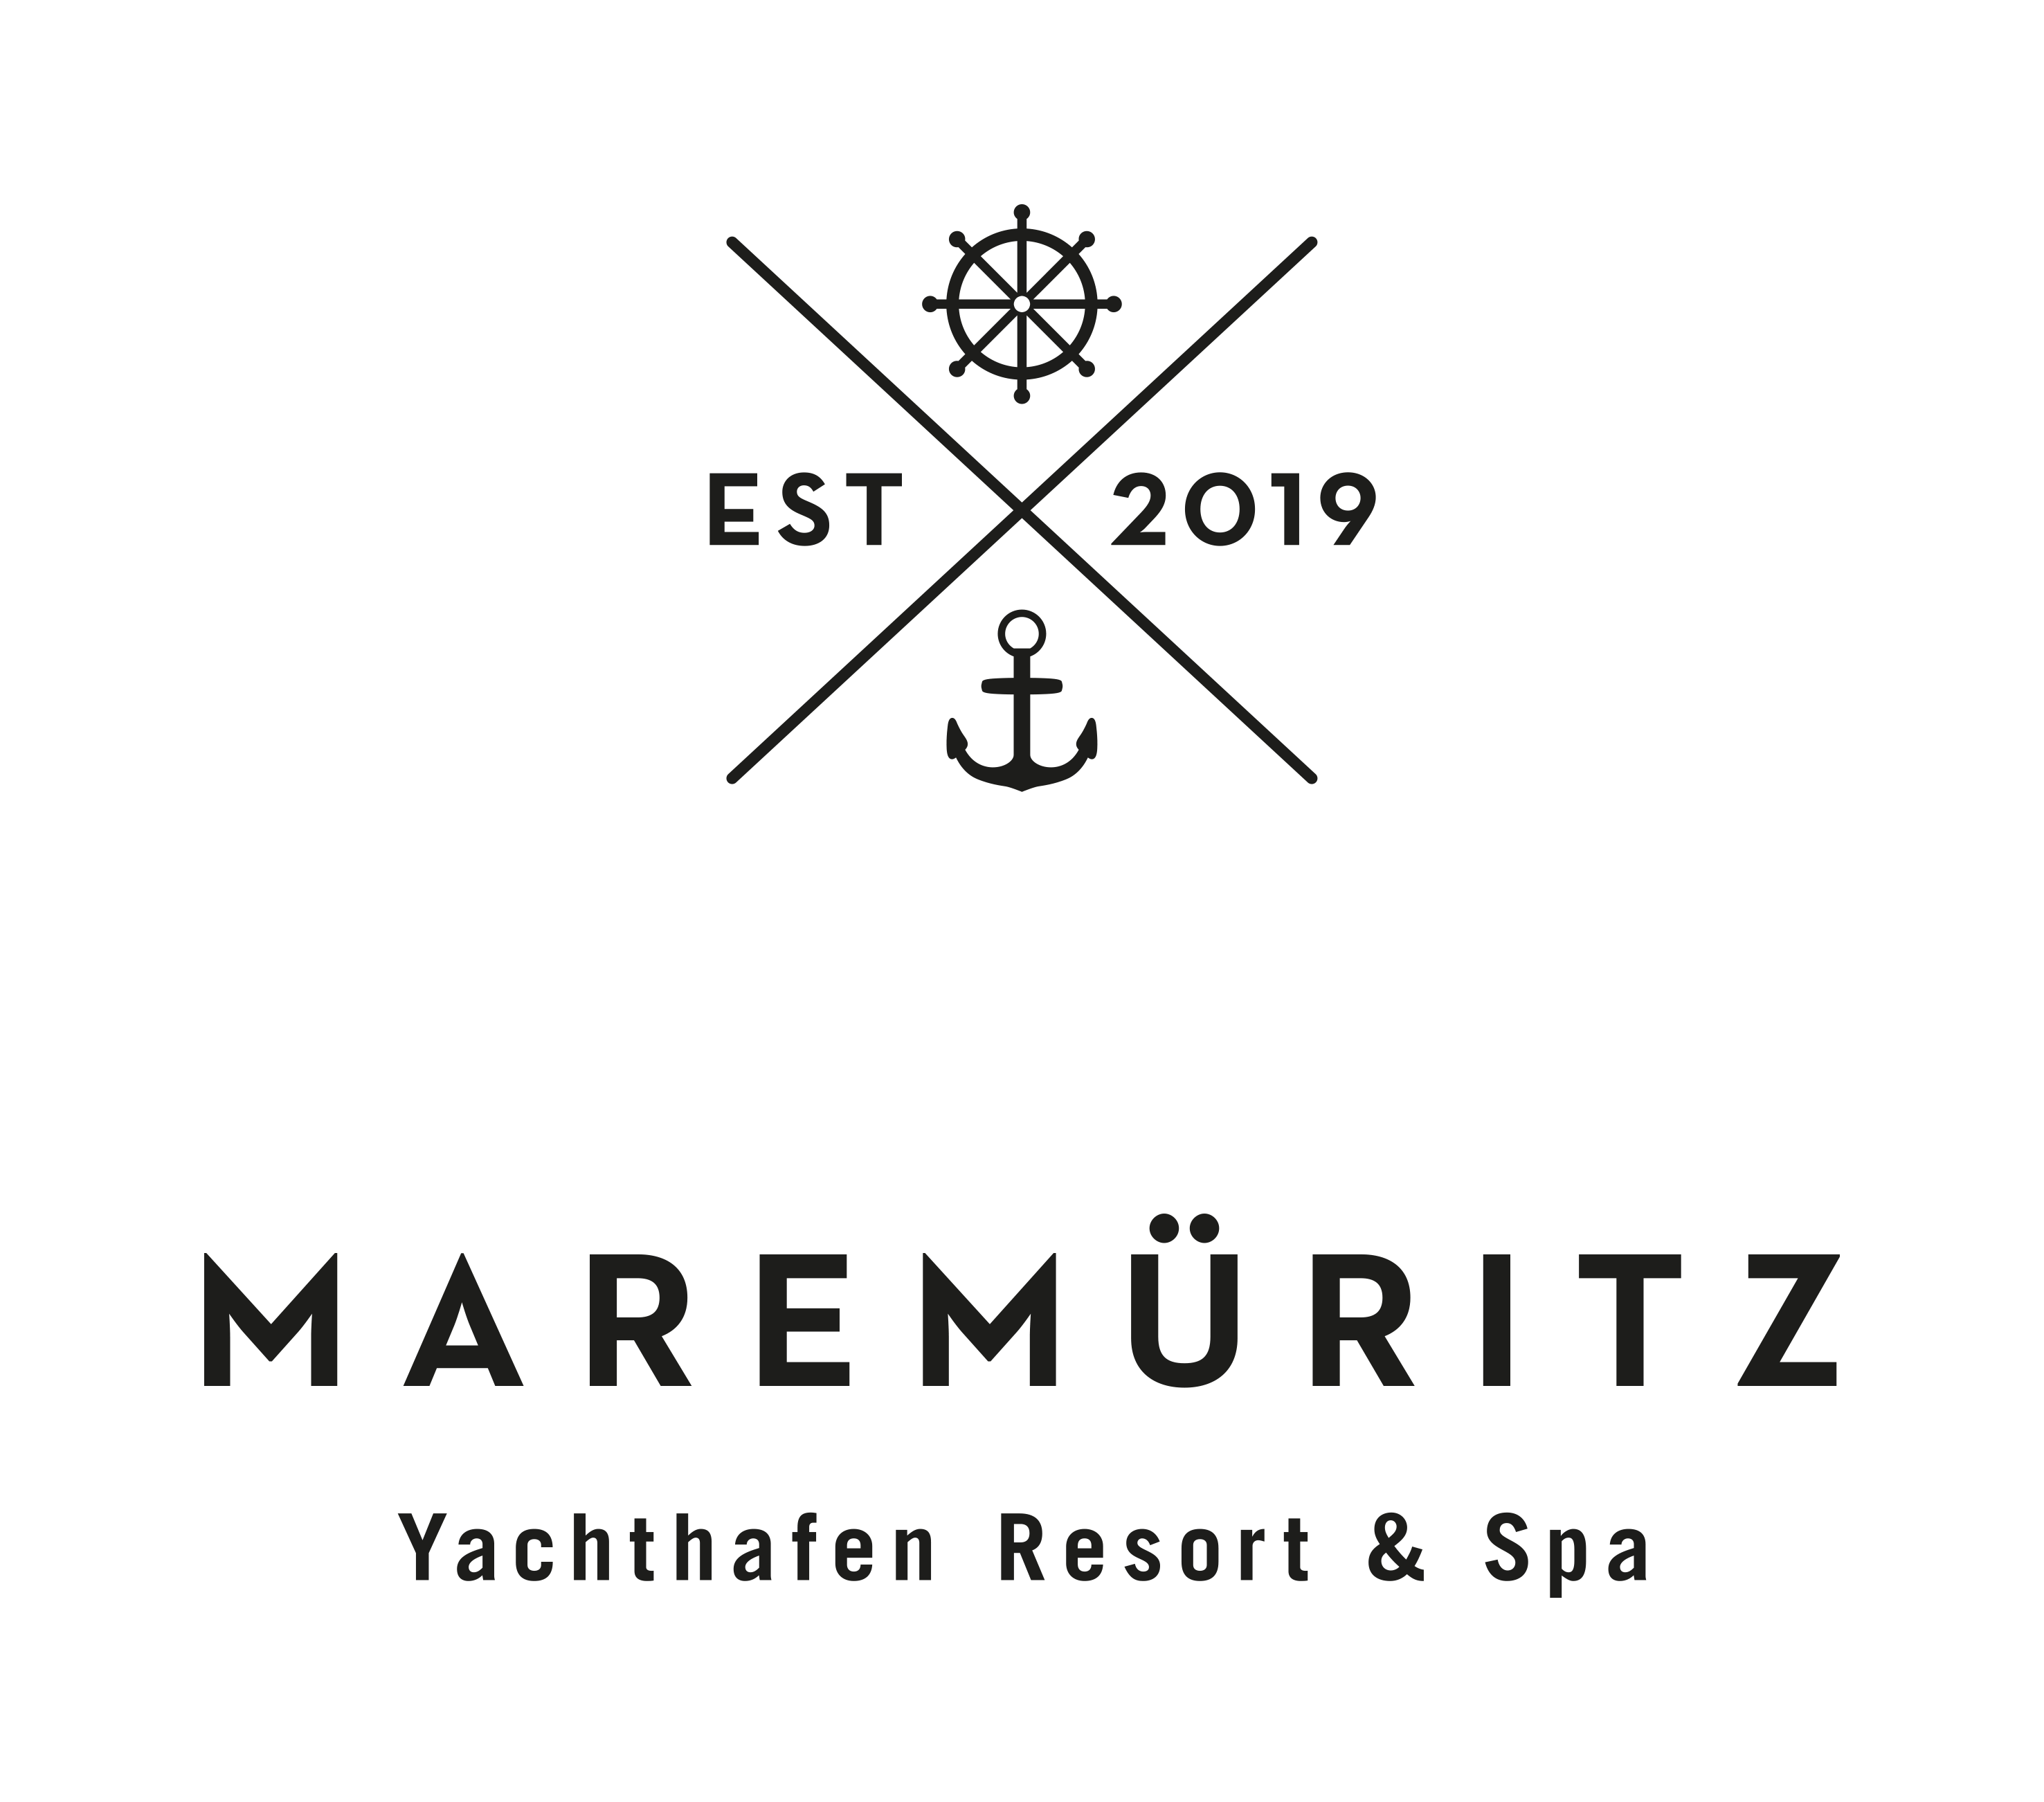 The image shows the black and white logo of MAREMÜRITZ Yachthafen Resort & Spa located in the land 